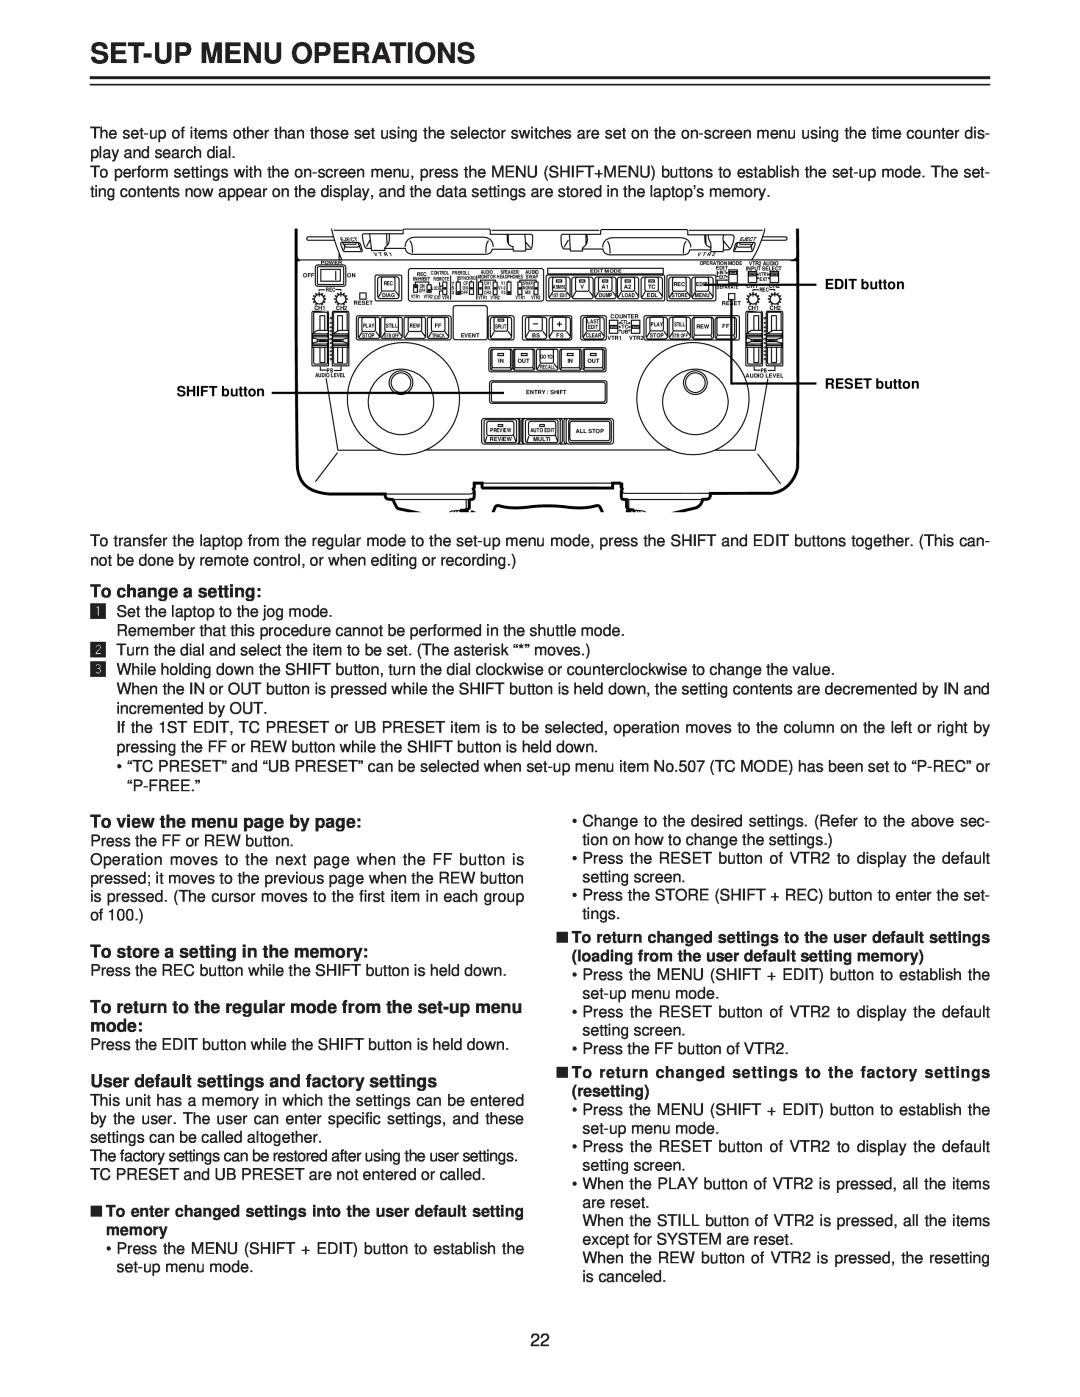 Panasonic AJ-LT85P manual Set-Up Menu Operations, To change a setting, To view the menu page by page 